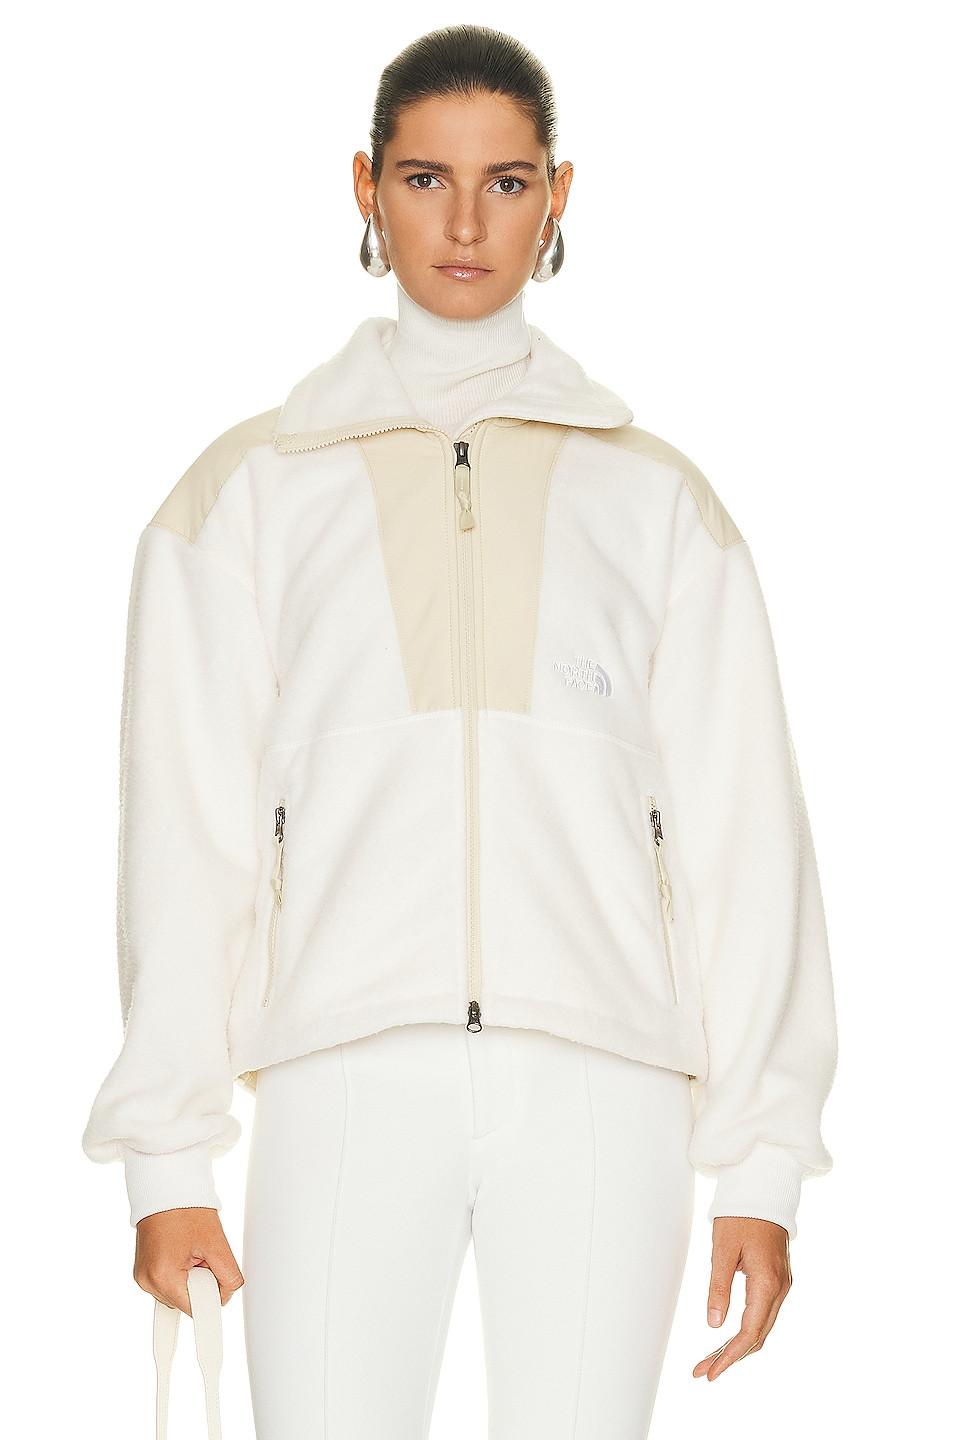 The North Face 94 Denali Jacket in White